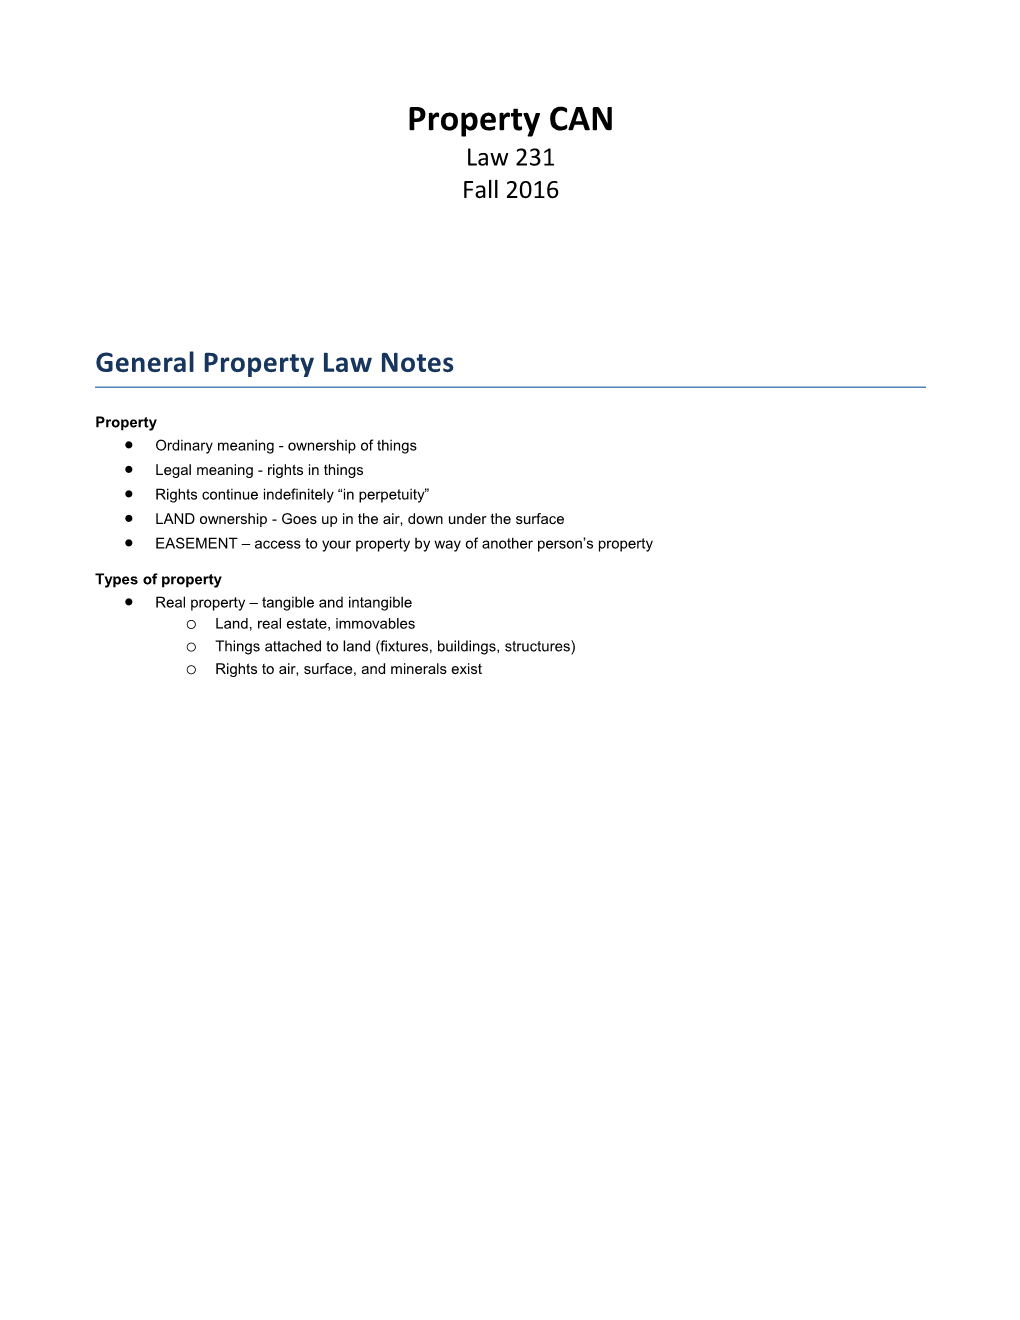 General Property Law Notes 1